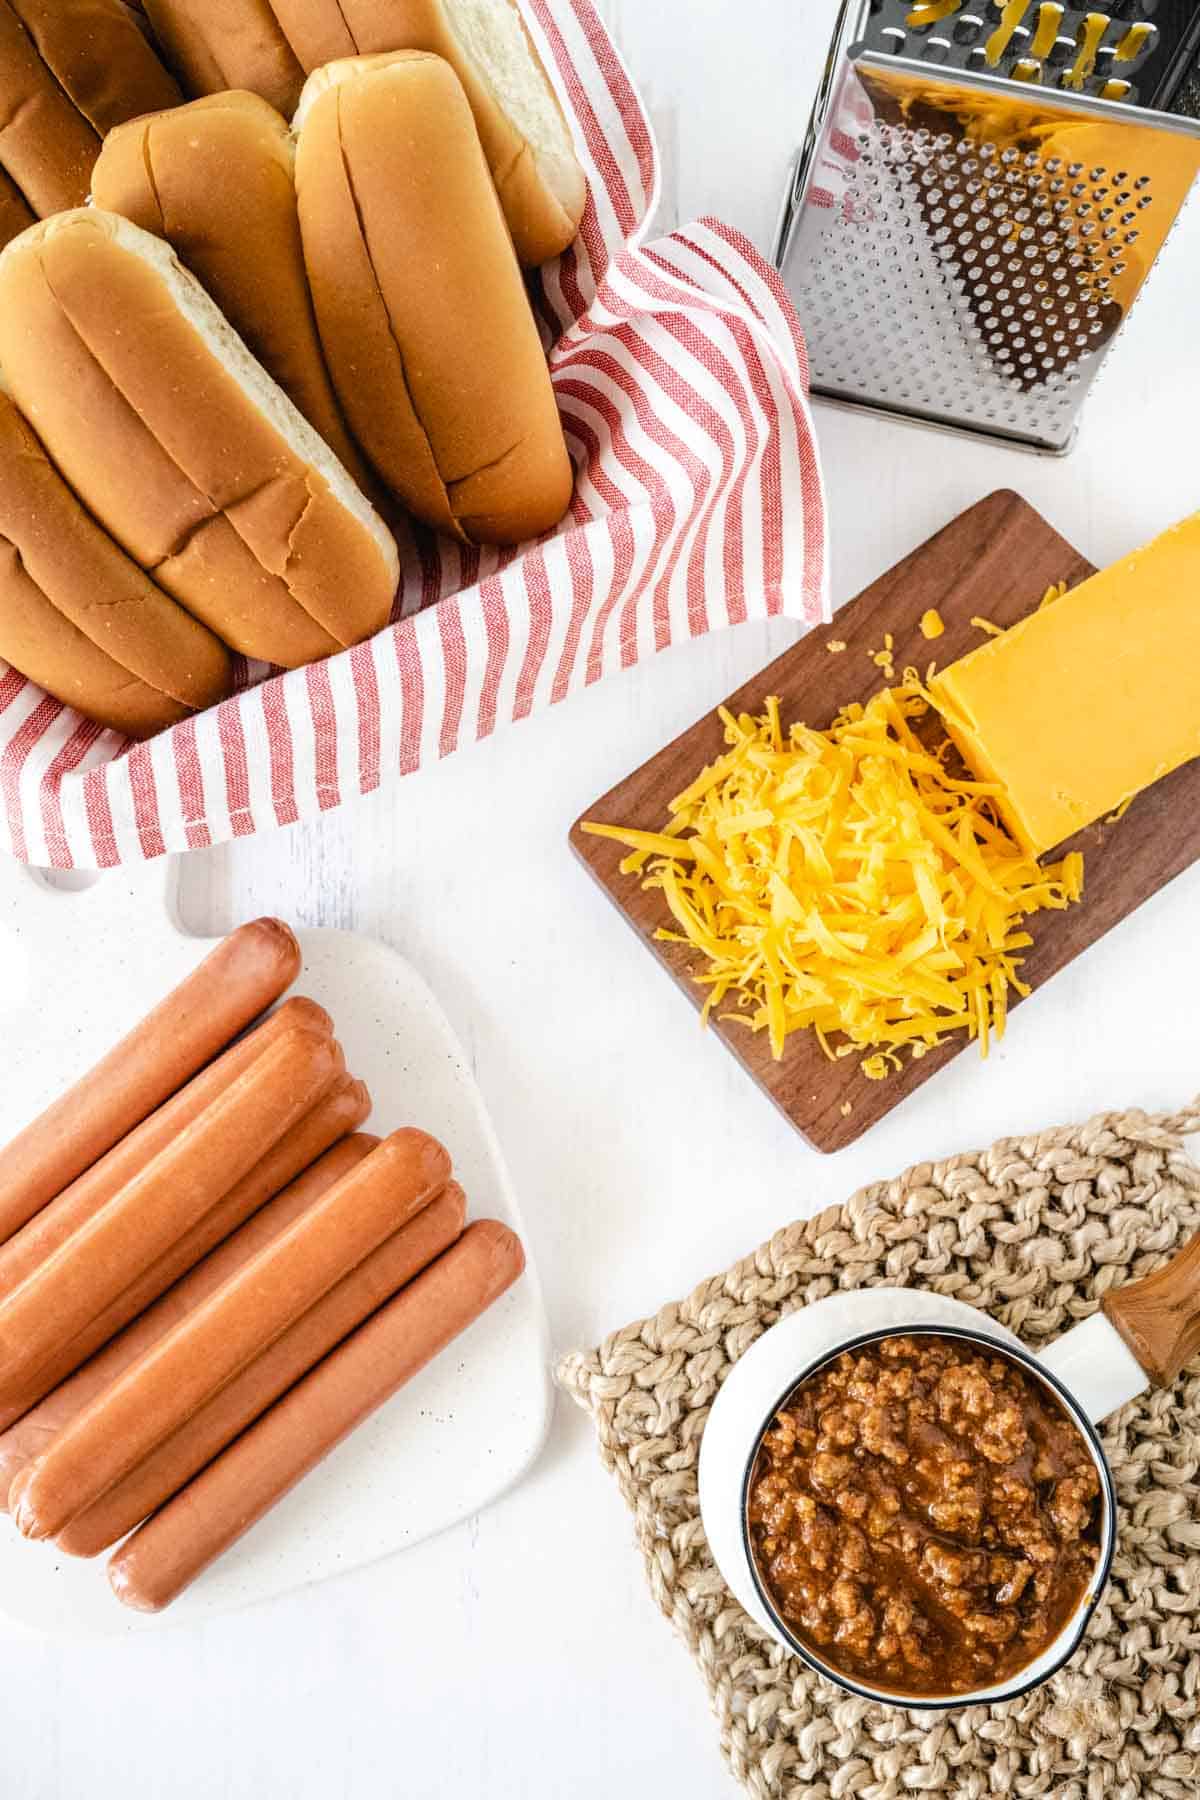 Baked Chili Cheese Dog Ingredients - hot dogs, hot dog buns, chili, and shredded cheddar cheese.